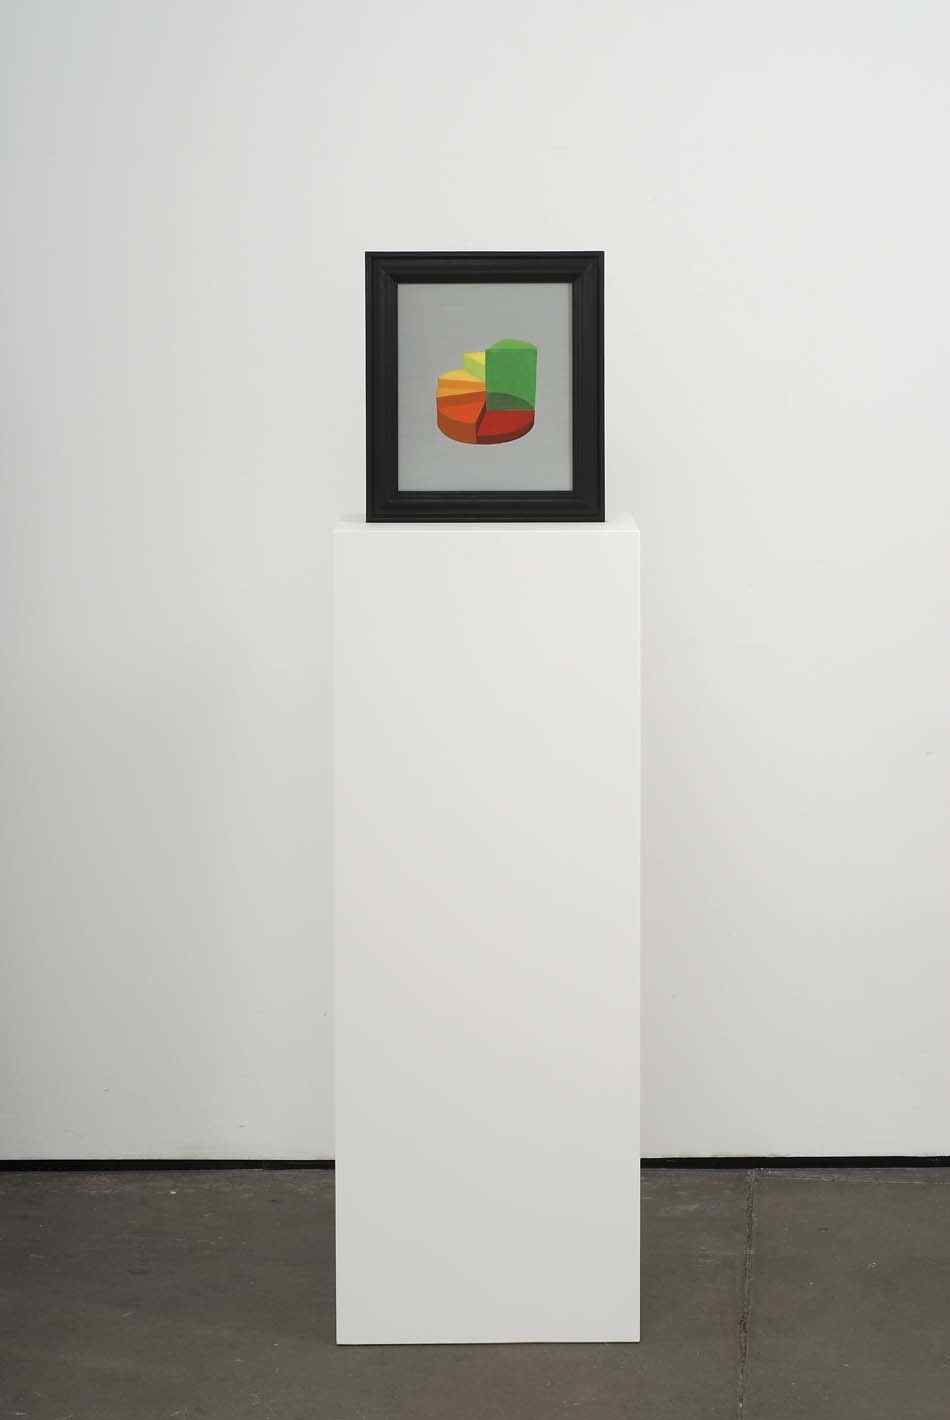      Slaughter   2009   Double-sided acrylic on board in artists frame mounted on pedestal   147.3 x 40 x 28cm  